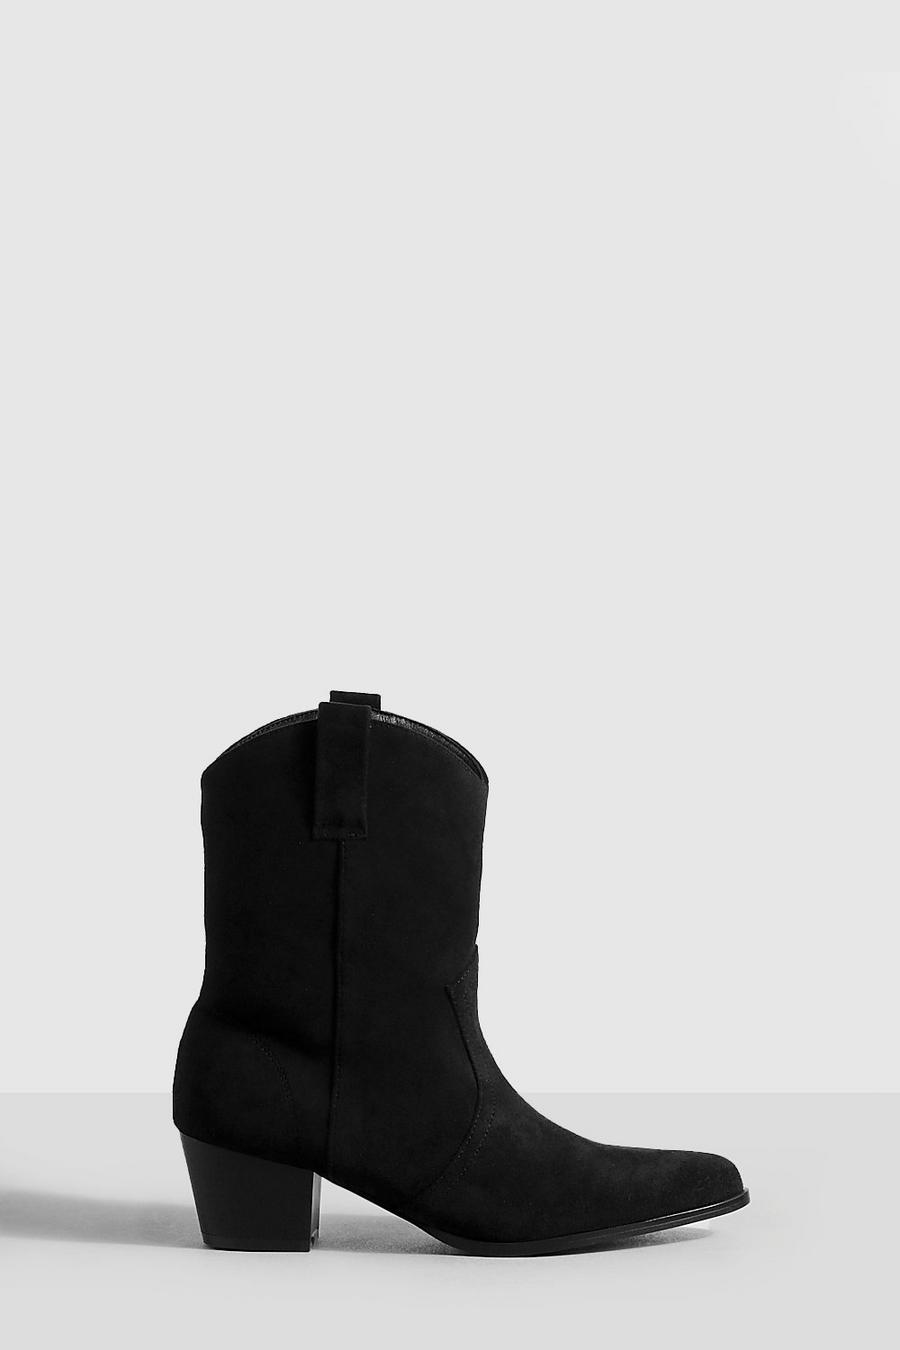 Ankle Boots | Black & Heeled Ankle Boots For Women | boohoo UK